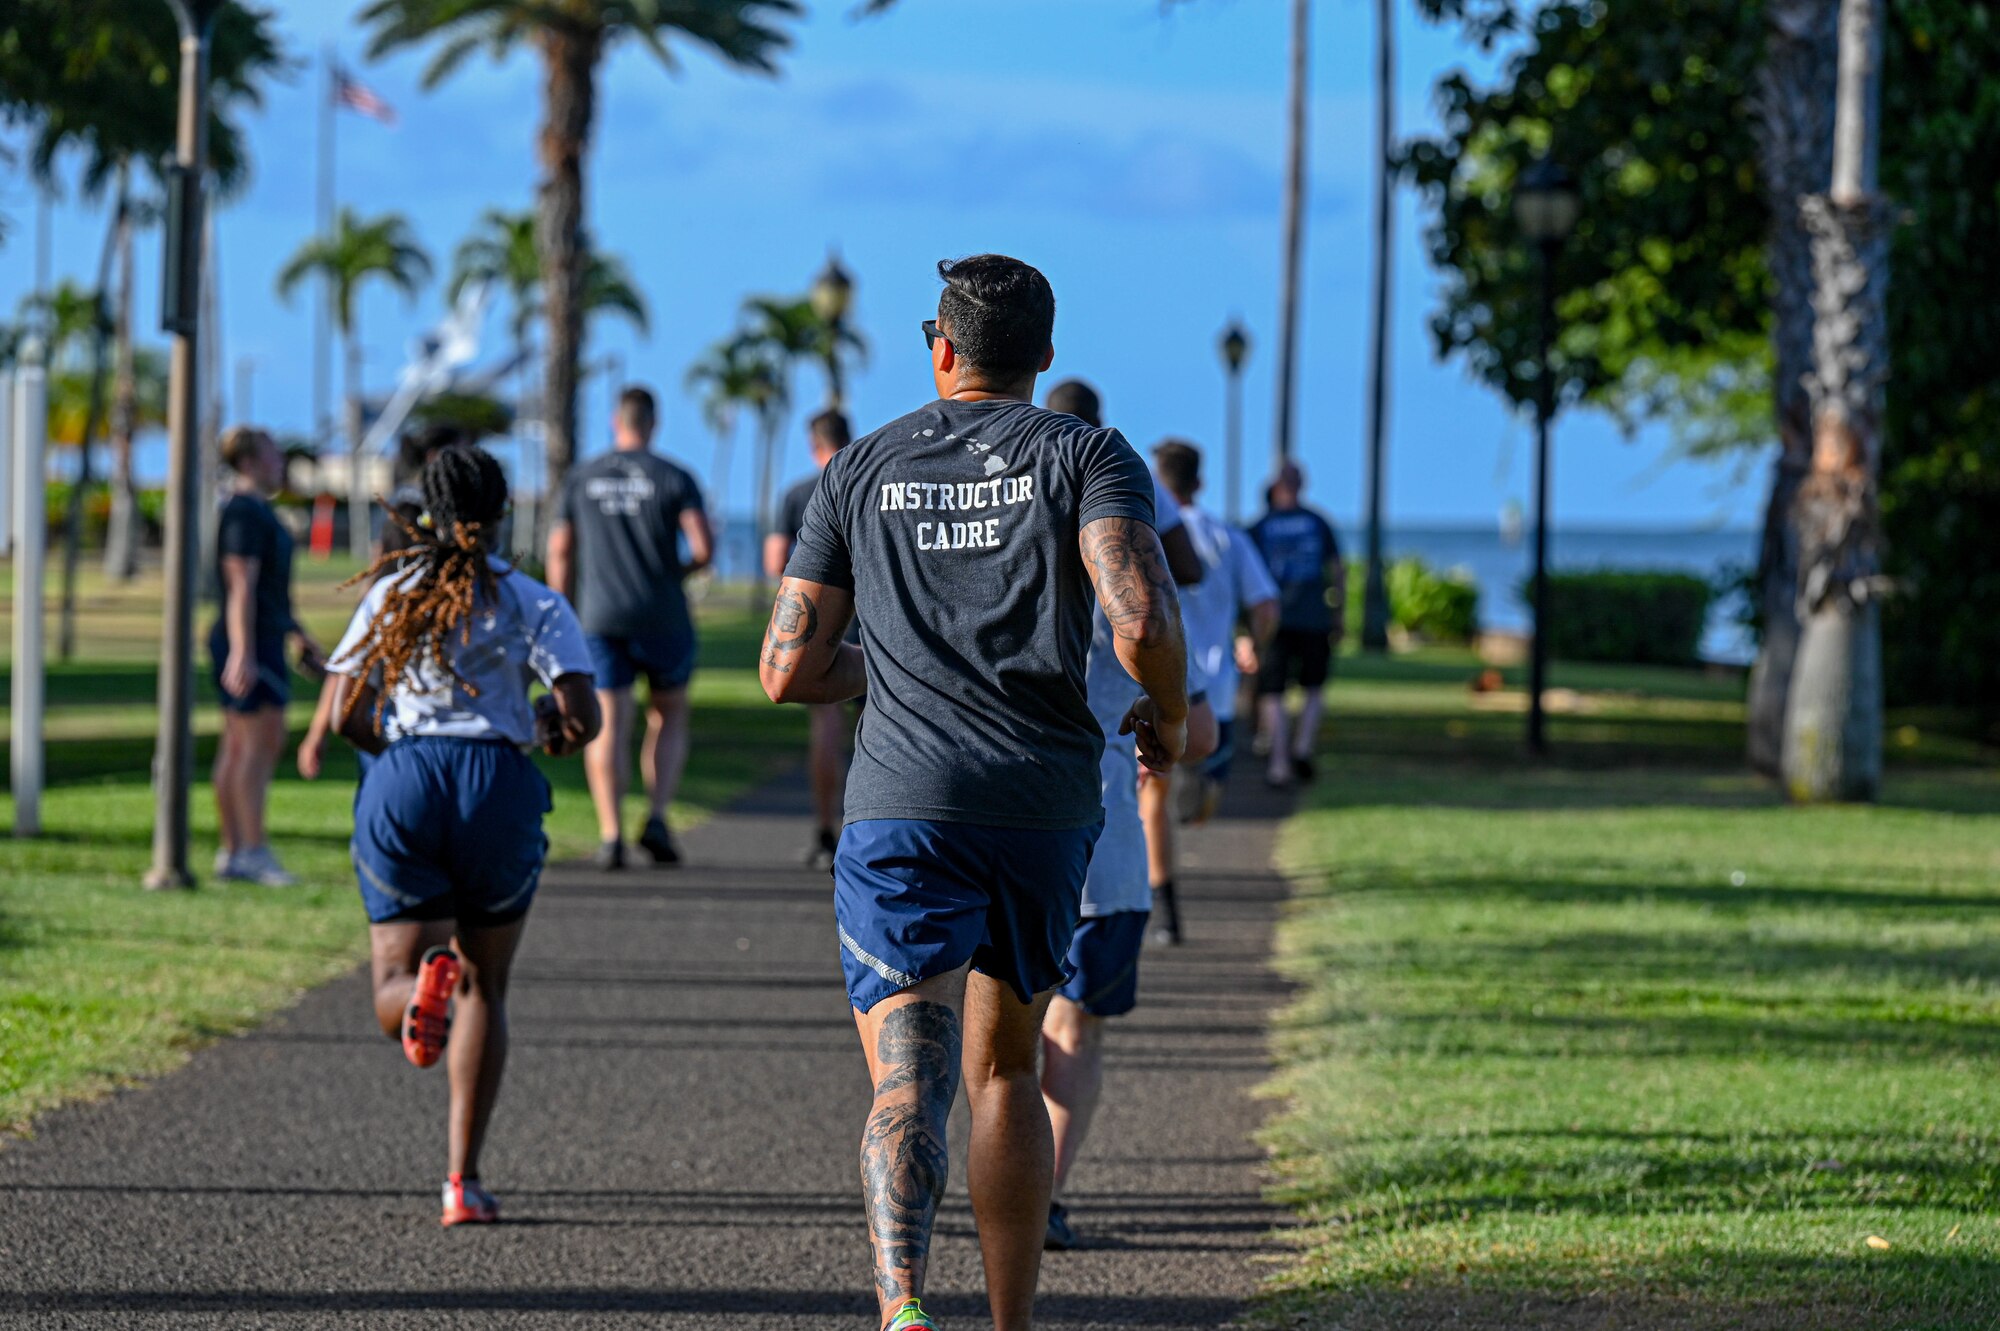 Cadre and students attending the Noncommissioned Officer Academy at the Binnicker Professional Military Education Center finish up a school run at Joint Base Pearl Harbor-Hickam, Hawaii, April 14, 2022. The goal of the NCOA program is to provide the best academic program possible by instilling relevant and solution-focused leadership attributes to enhance military organizations. (U.S. Air Force photo by 1st Lt. Benjamin Aronson)